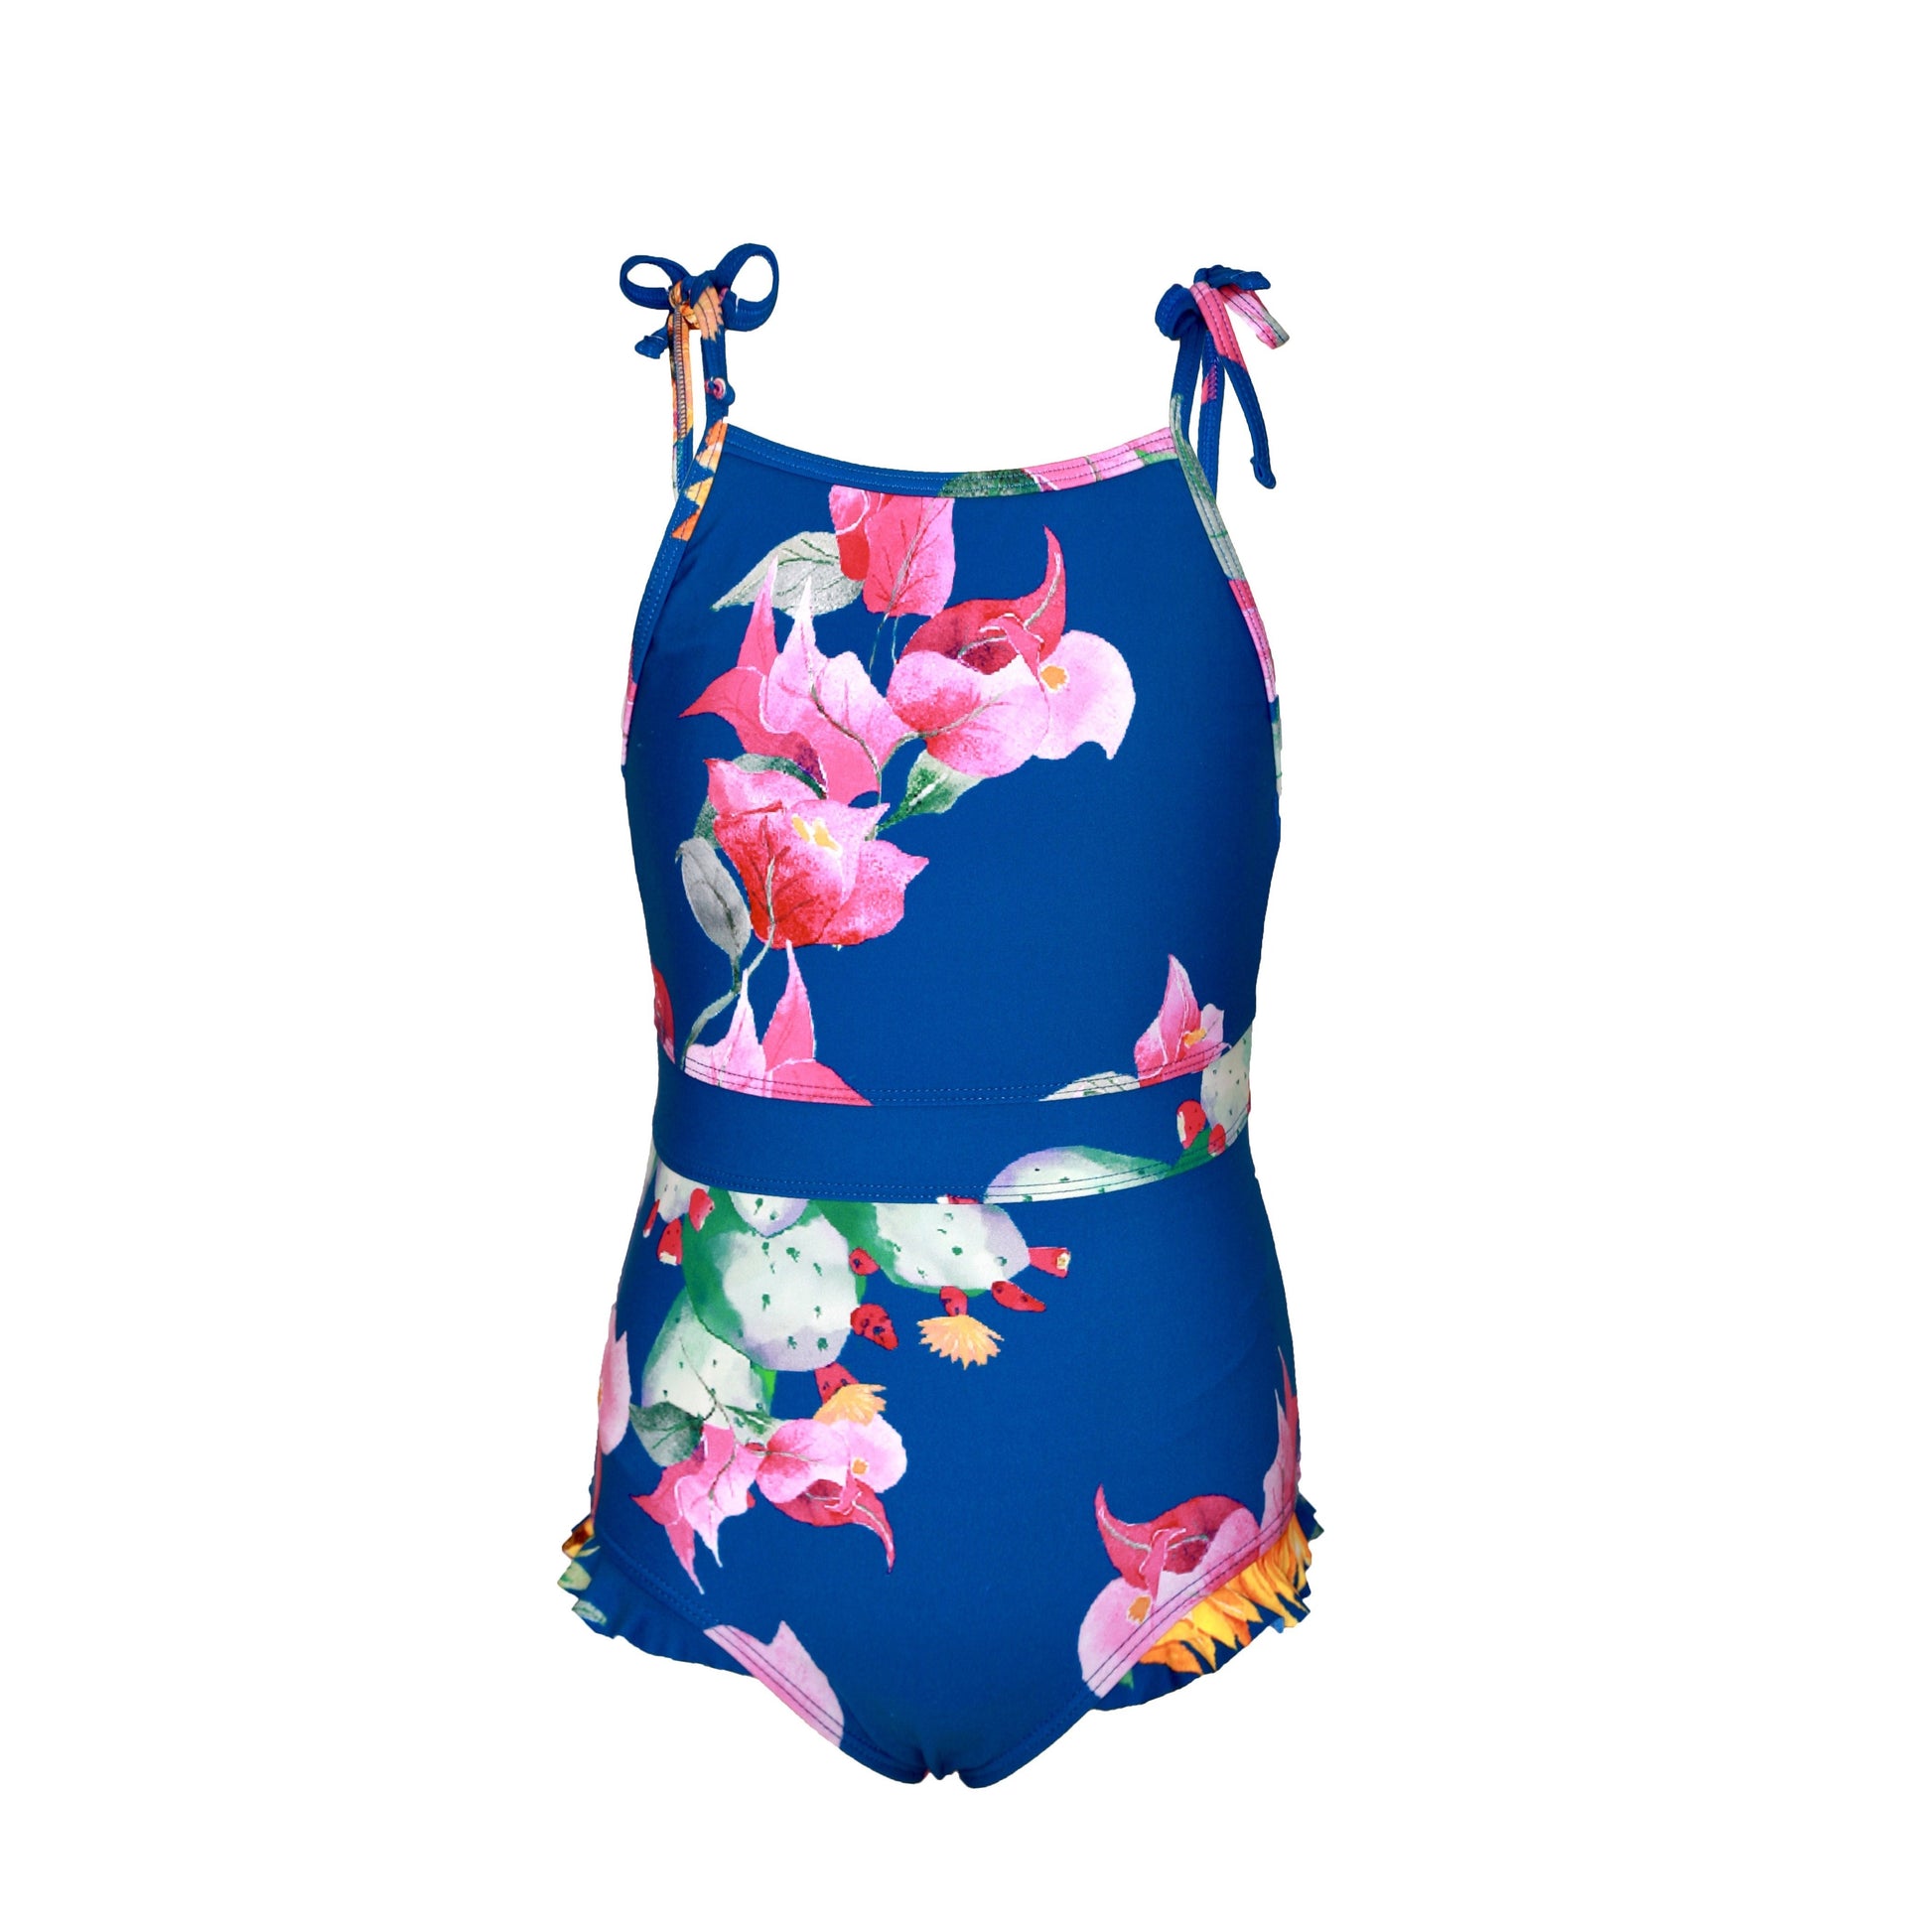 Girls Fleur Singlet Style One piece swimsuit with tie up shoulders by Plivati Swimwear Children's collection